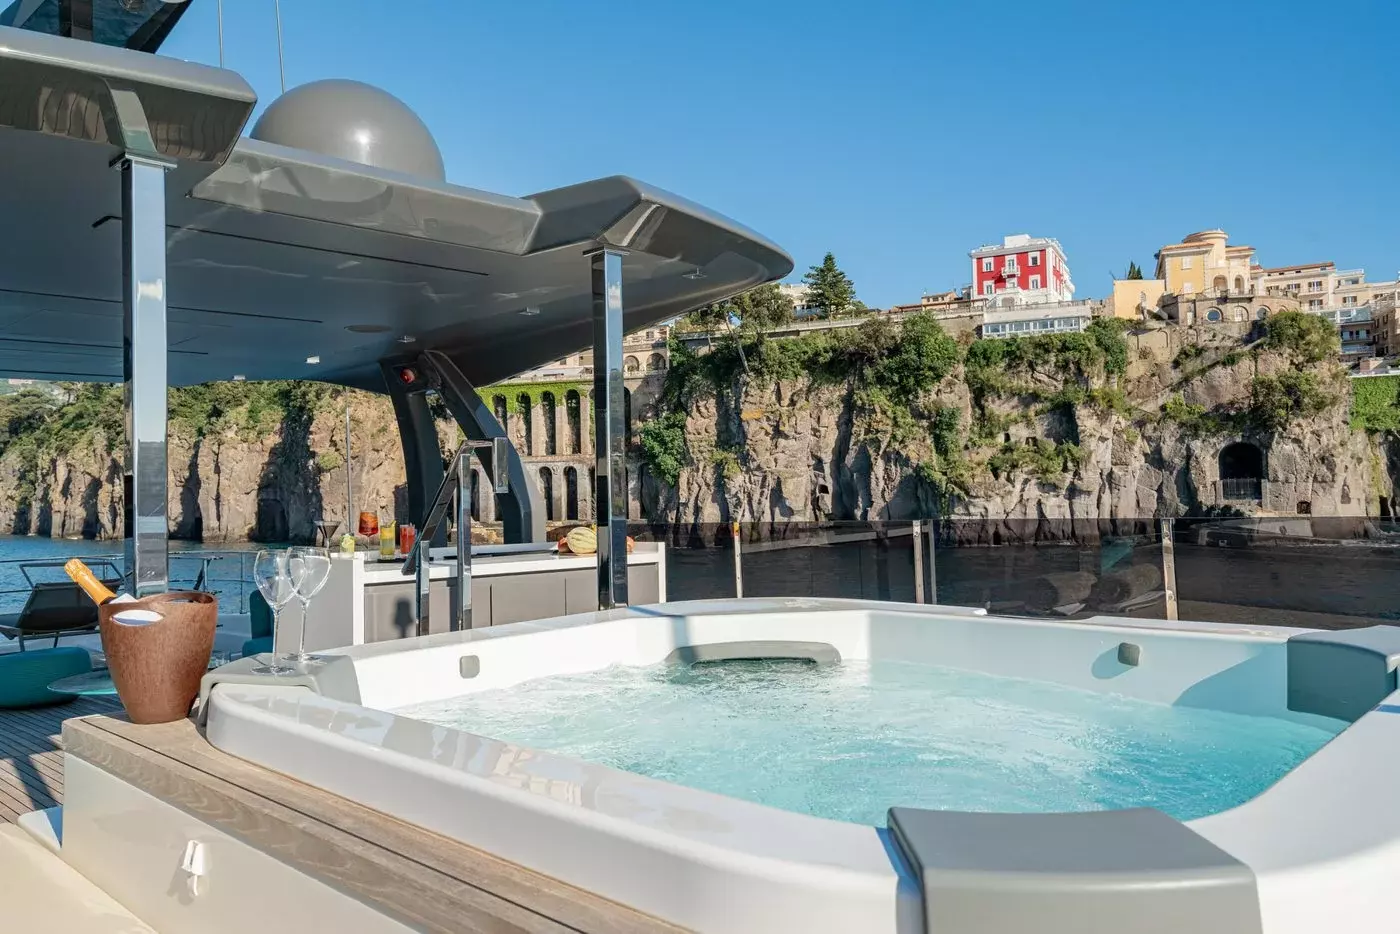 South by Ferretti - Top rates for a Charter of a private Superyacht in Monaco